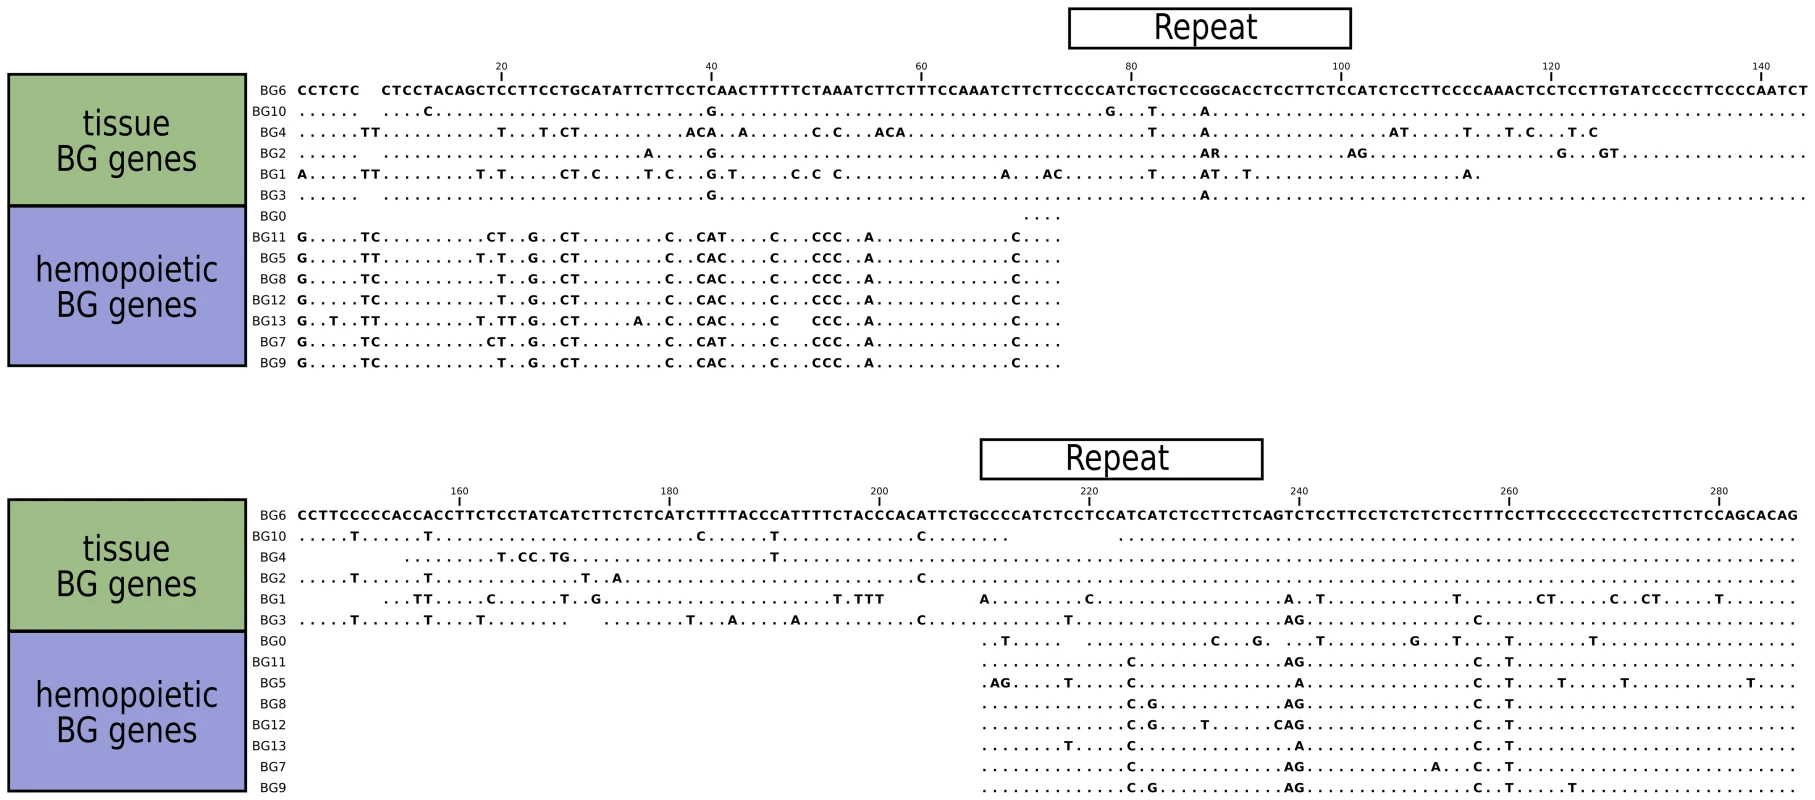 Sequence alignments for the 5'UTR of B12 BG genes, showing the separation into genes expressed in hemopoietic cells and in tissues.